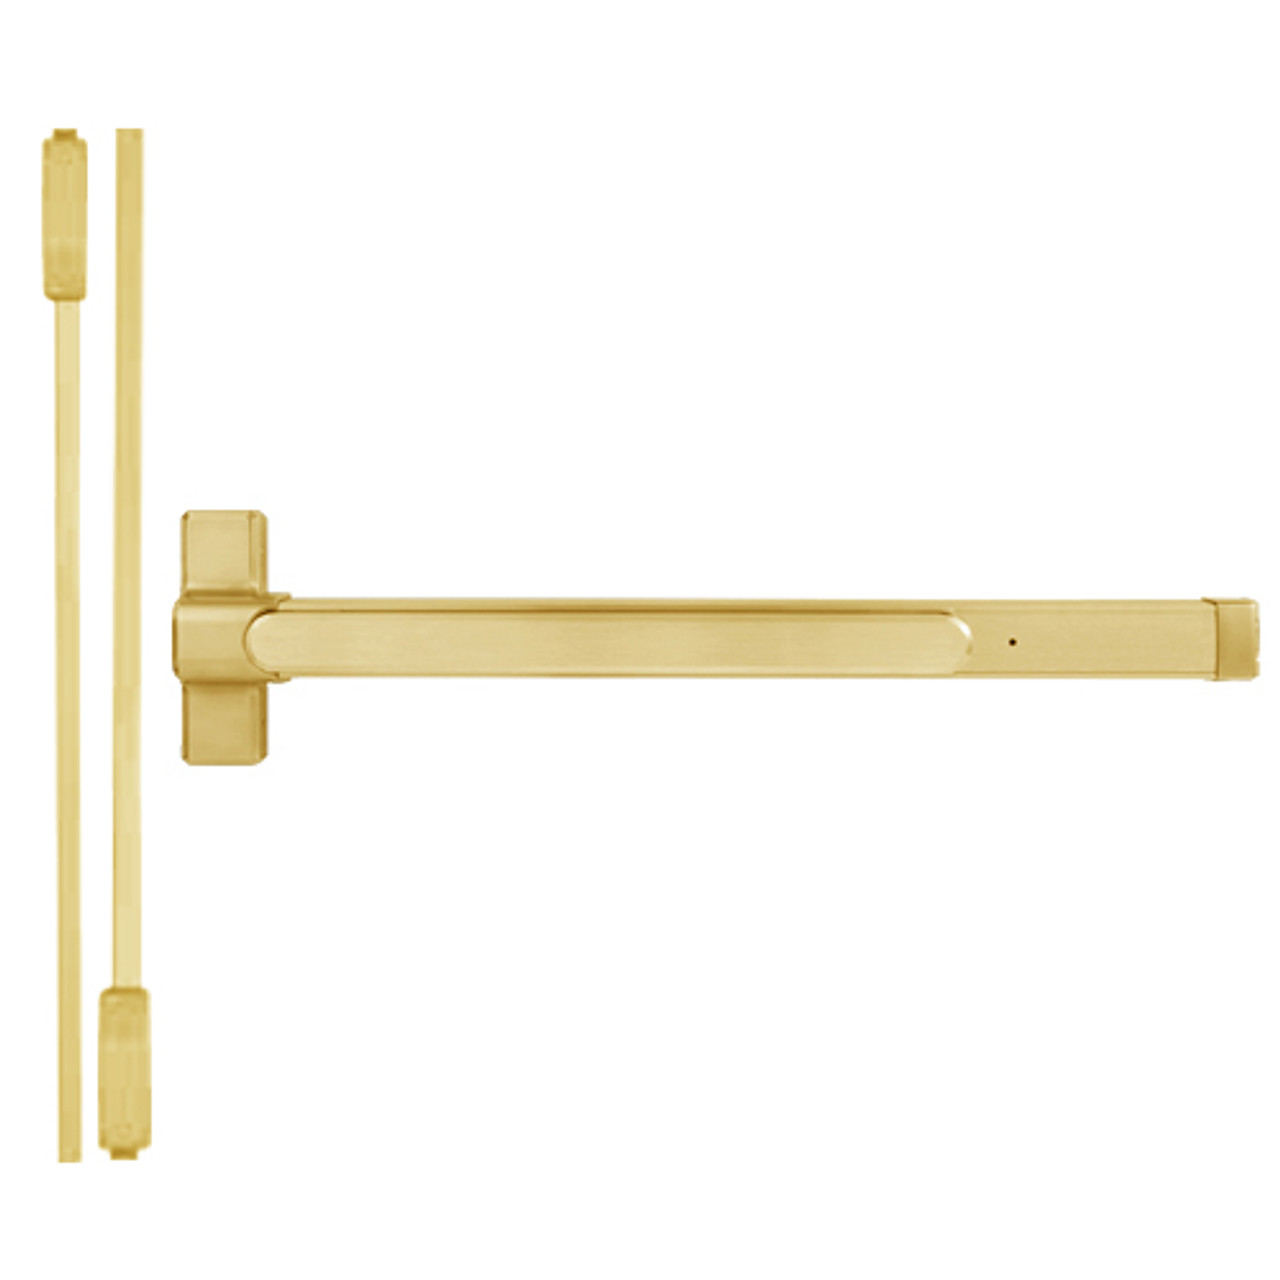 QED116X-48-7-605 Stanley QED100 Series Heavy Duty Surface Vertical Rod Fire Rated Exit Device in Bright Brass Finish